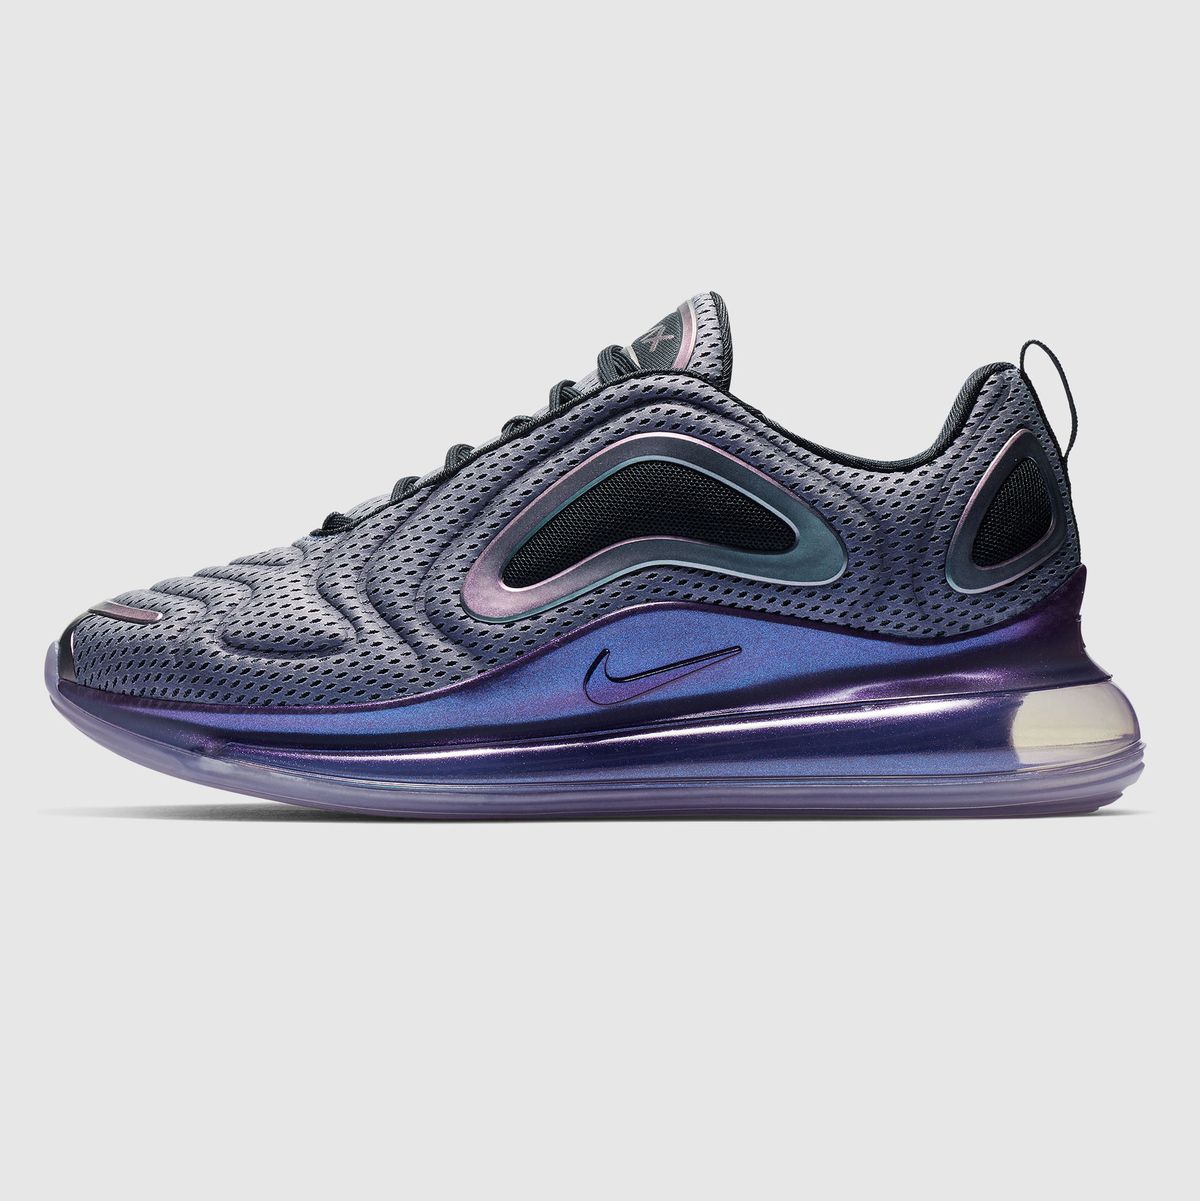 Nike's Air Max 720 Full, Official Reveal - Air Max 720 Release Date